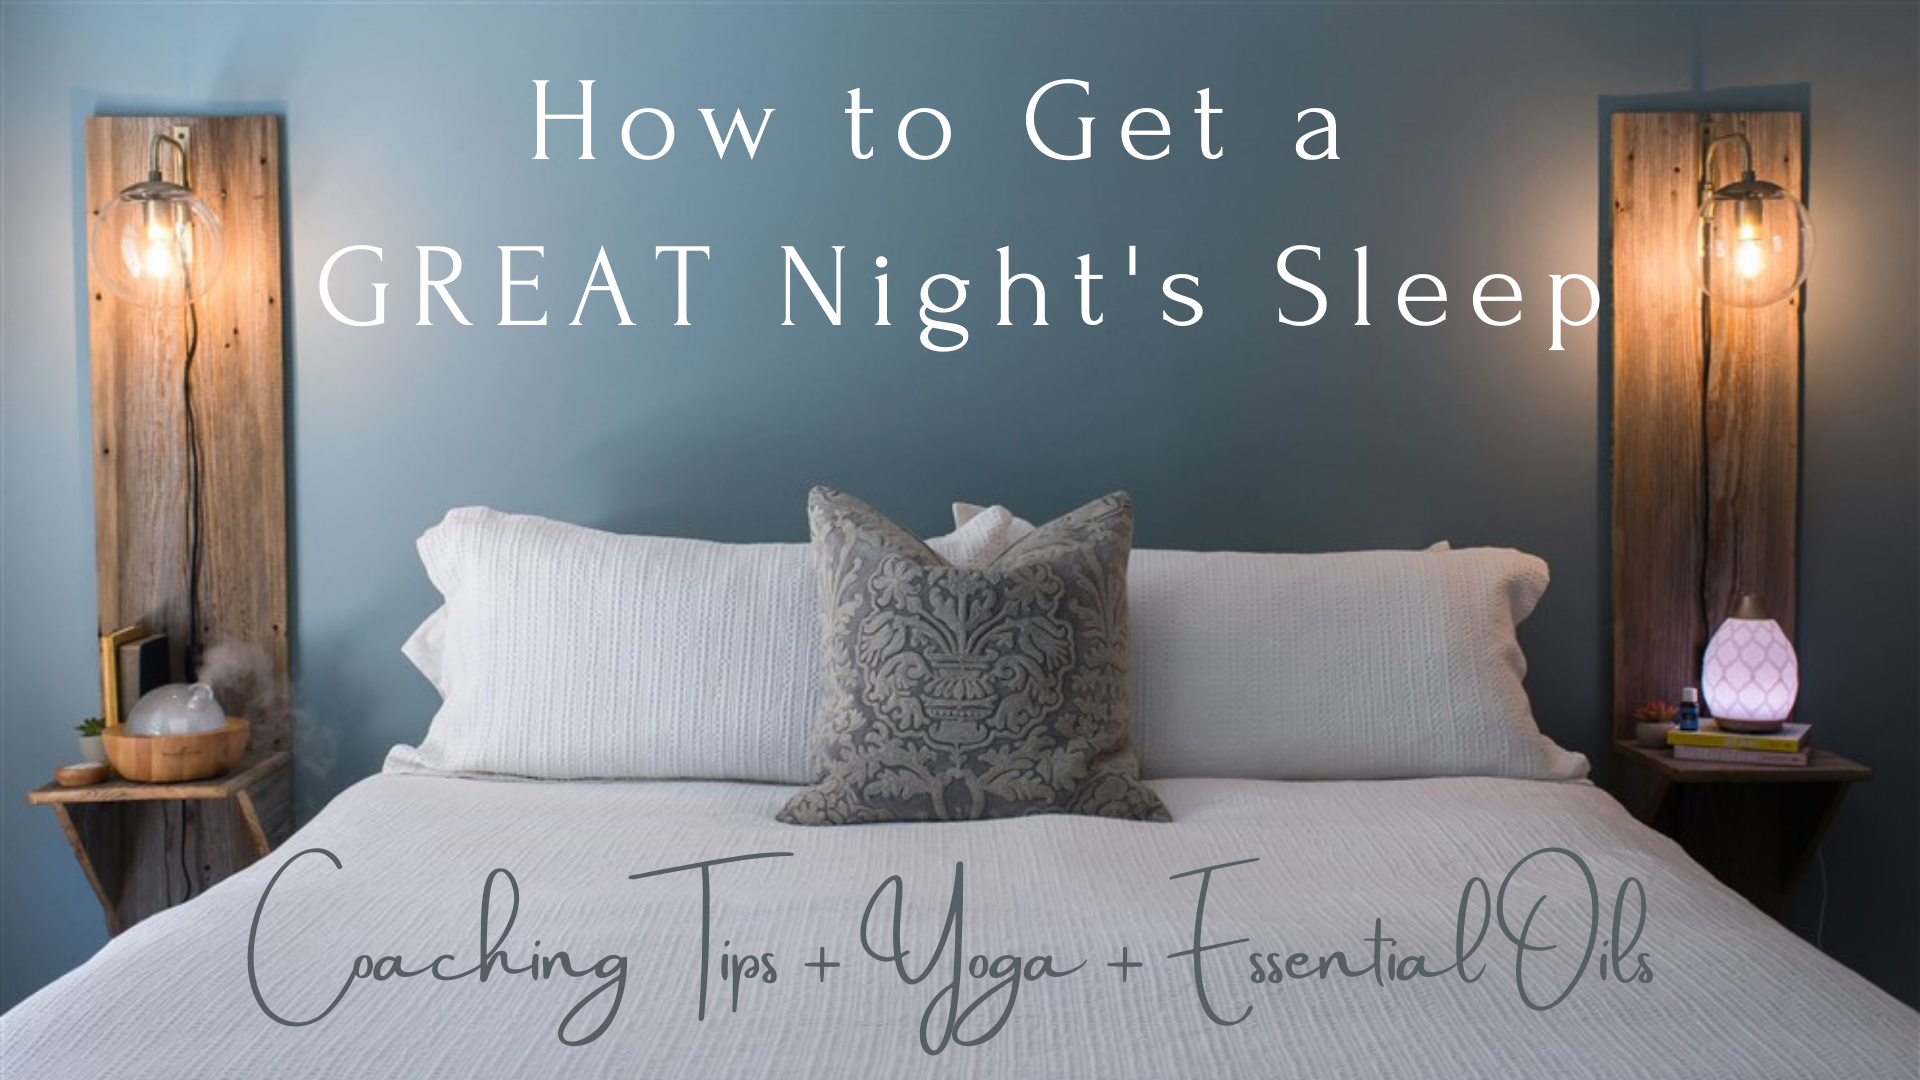 How to Get a GREAT Night's Sleep: Coaching Tips + Yoga + Essential Oils